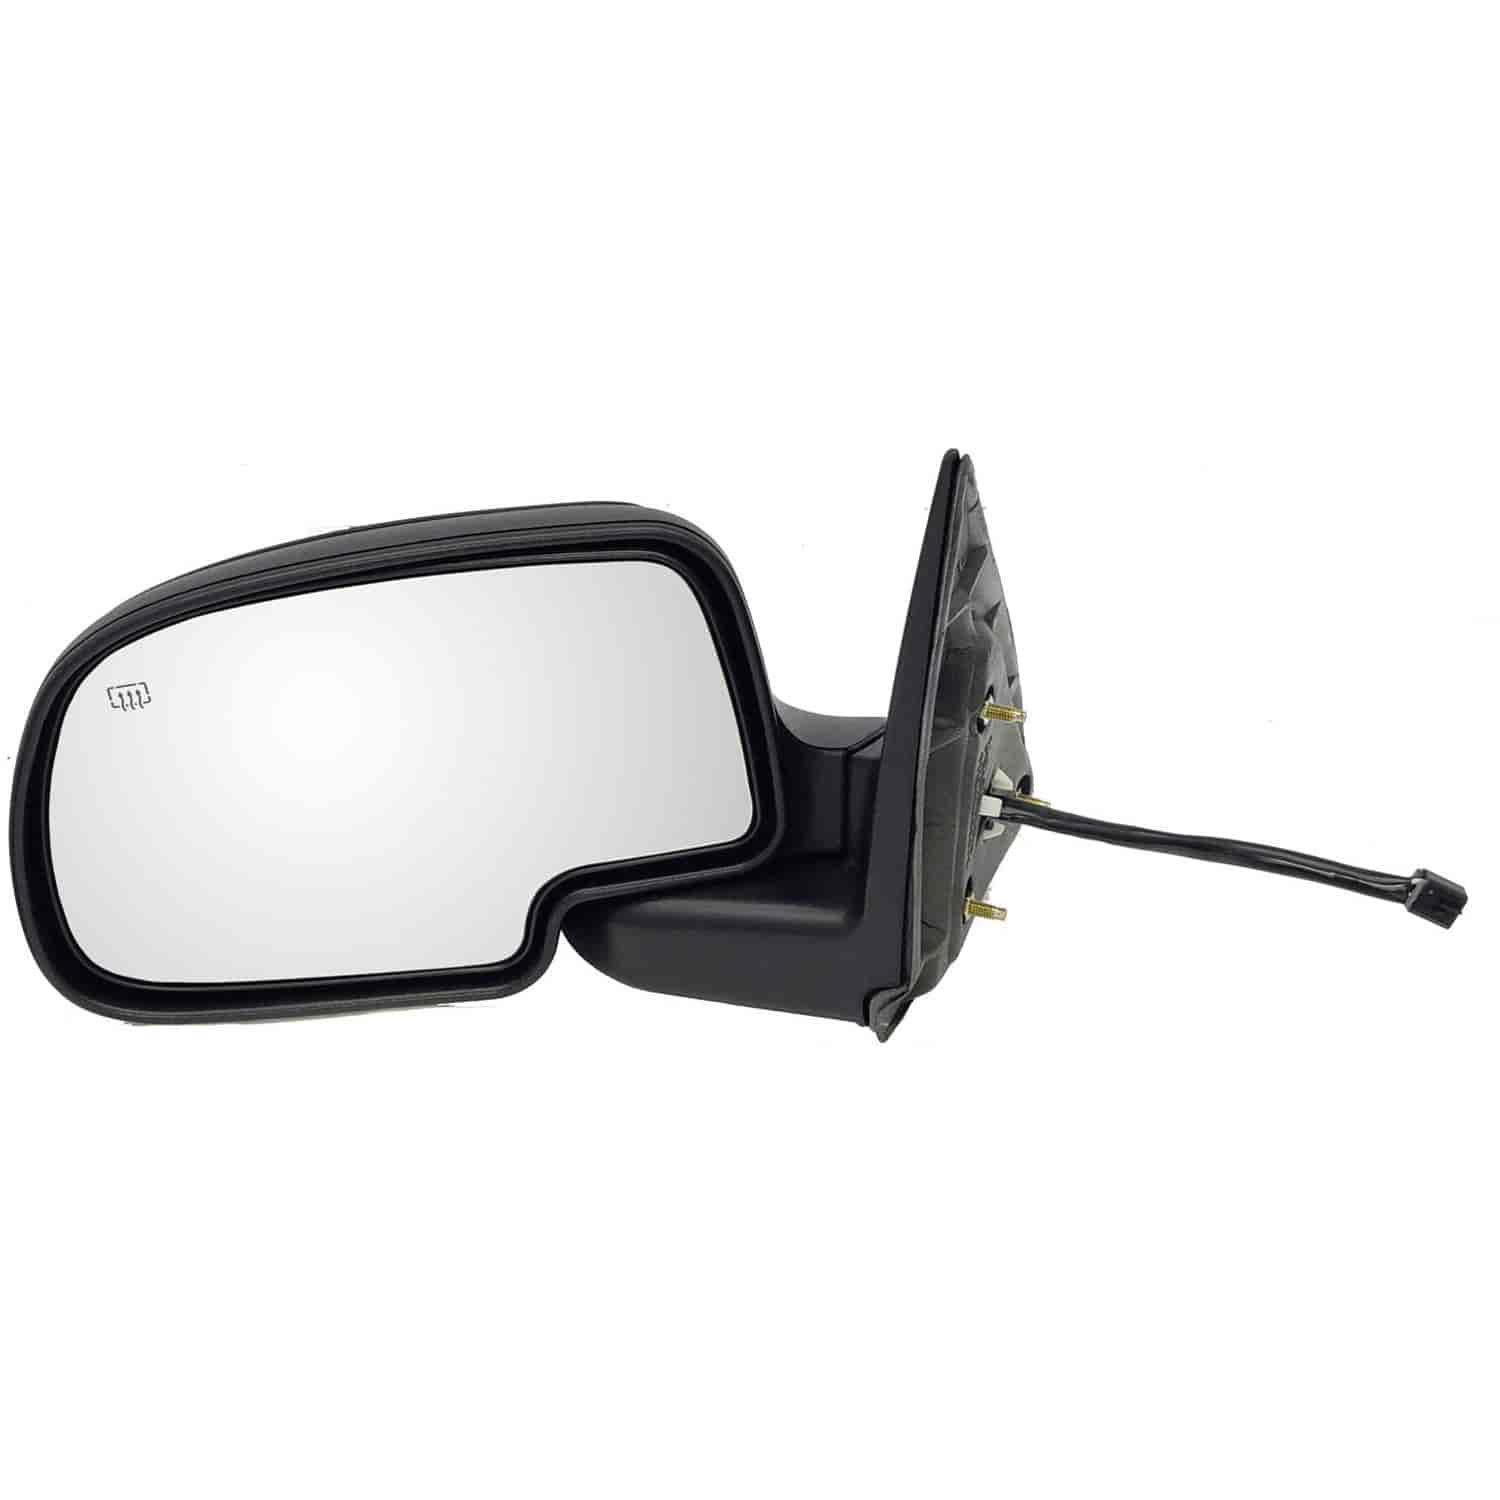 Side View Mirror Power Heated With Lamp Textured